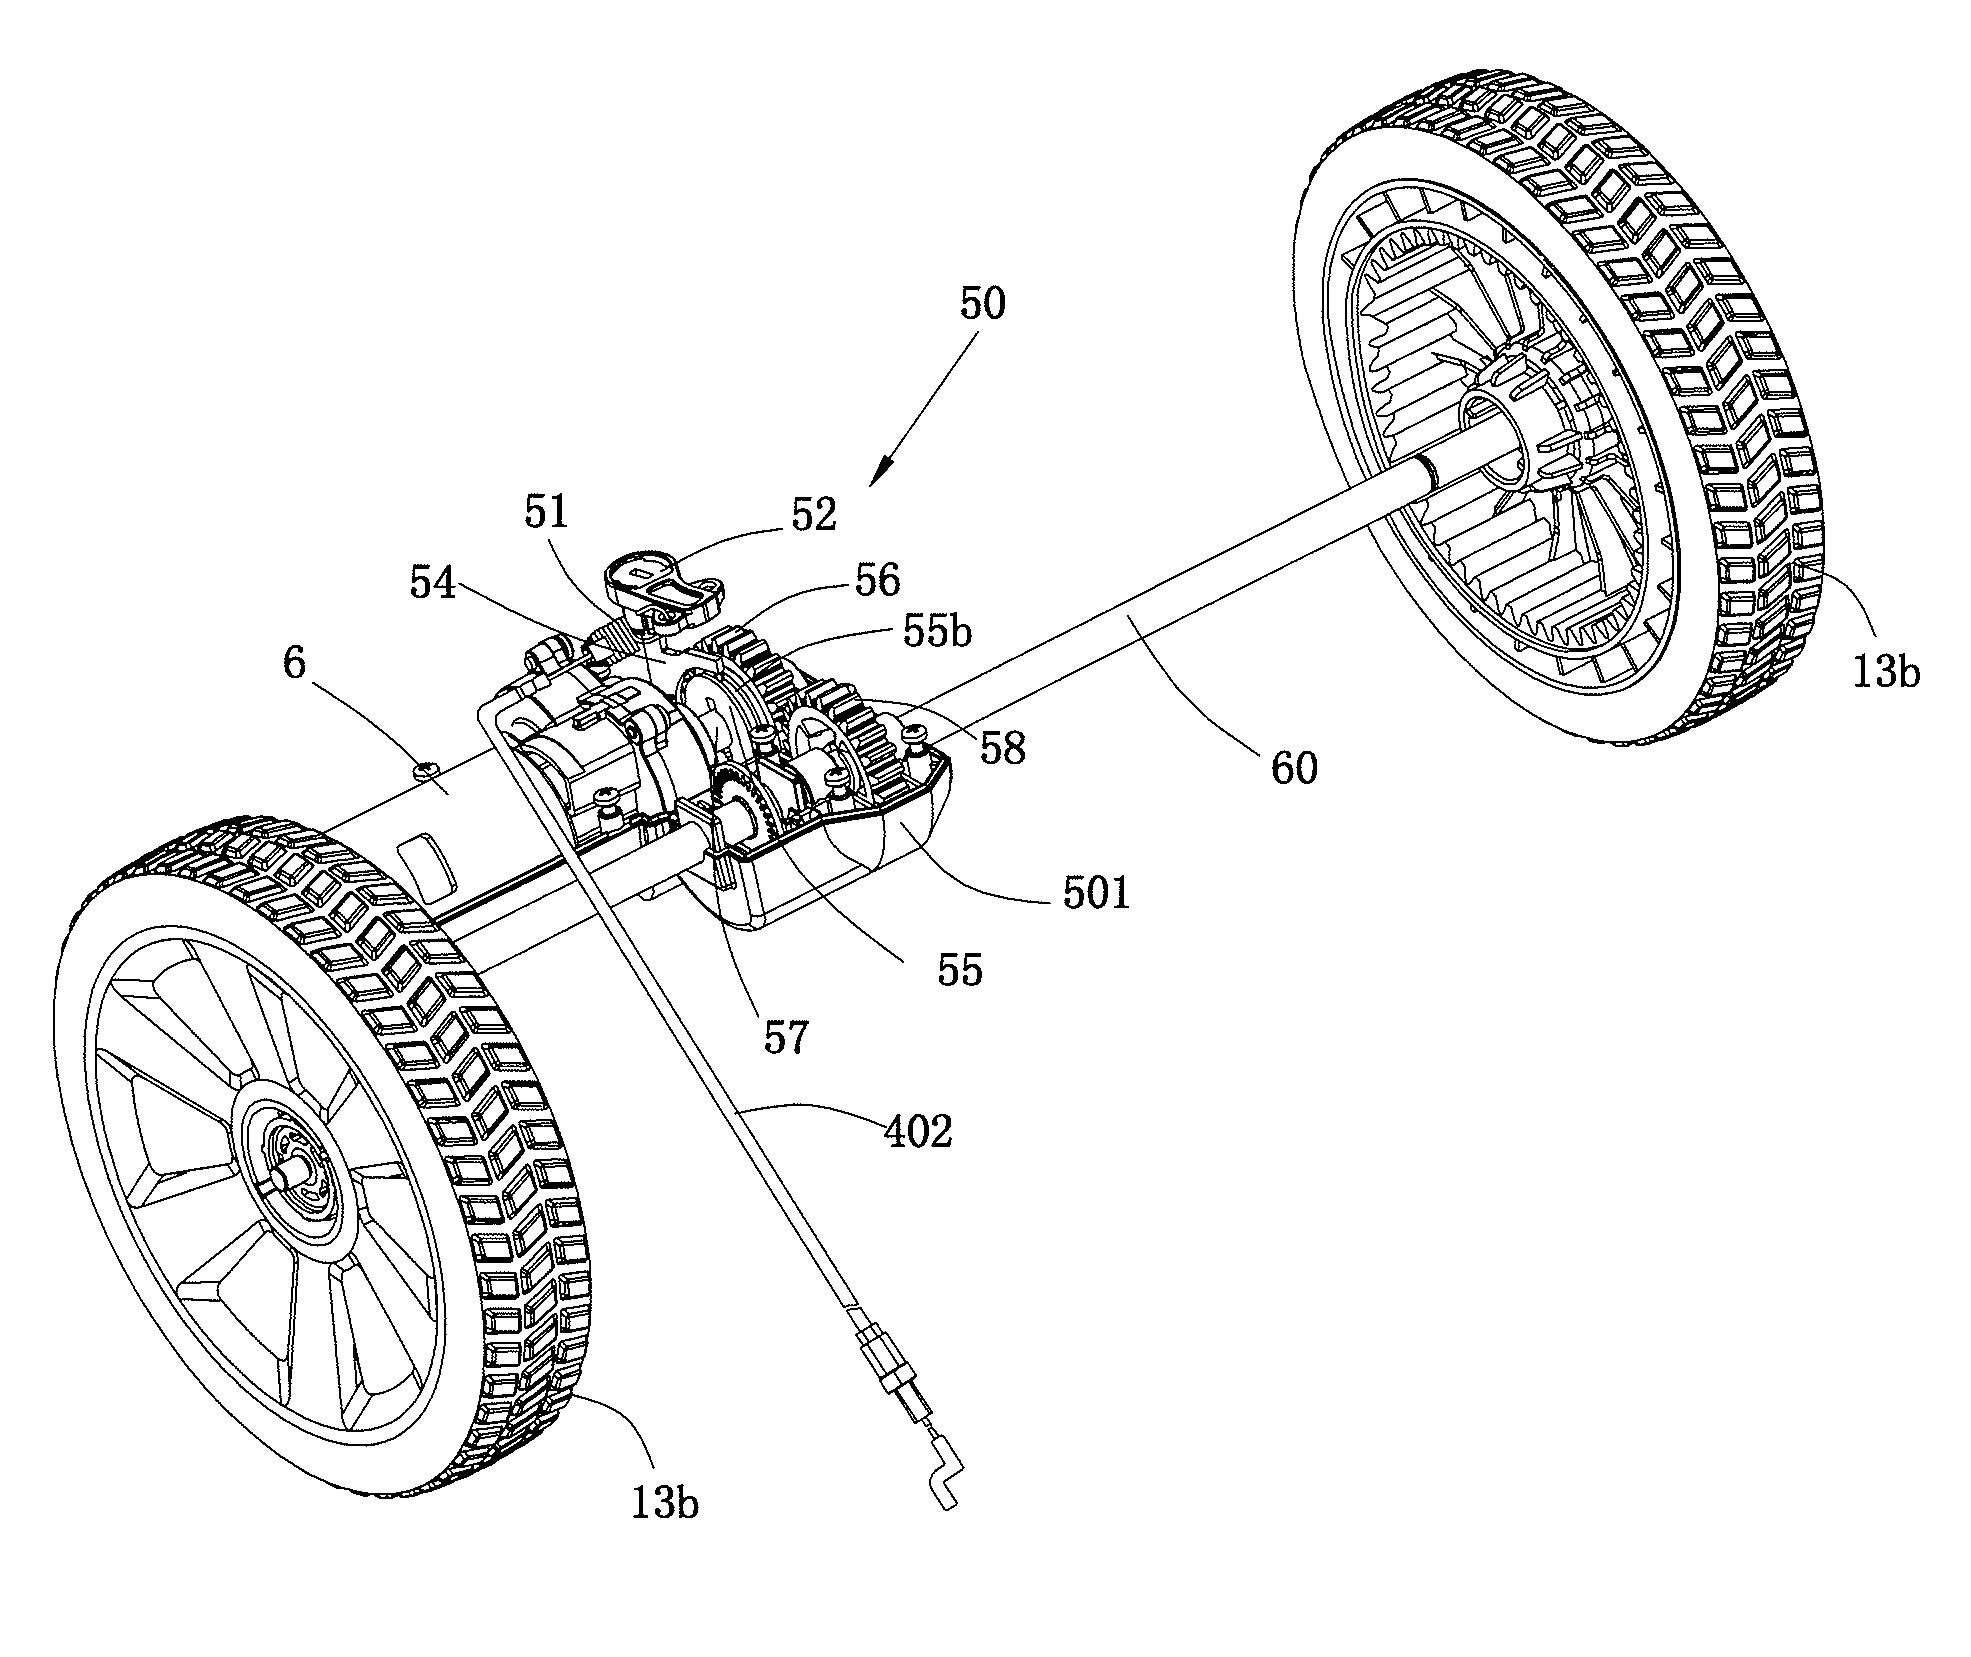 Lawn mower and method for controlling self-driving operations of the lawn mower